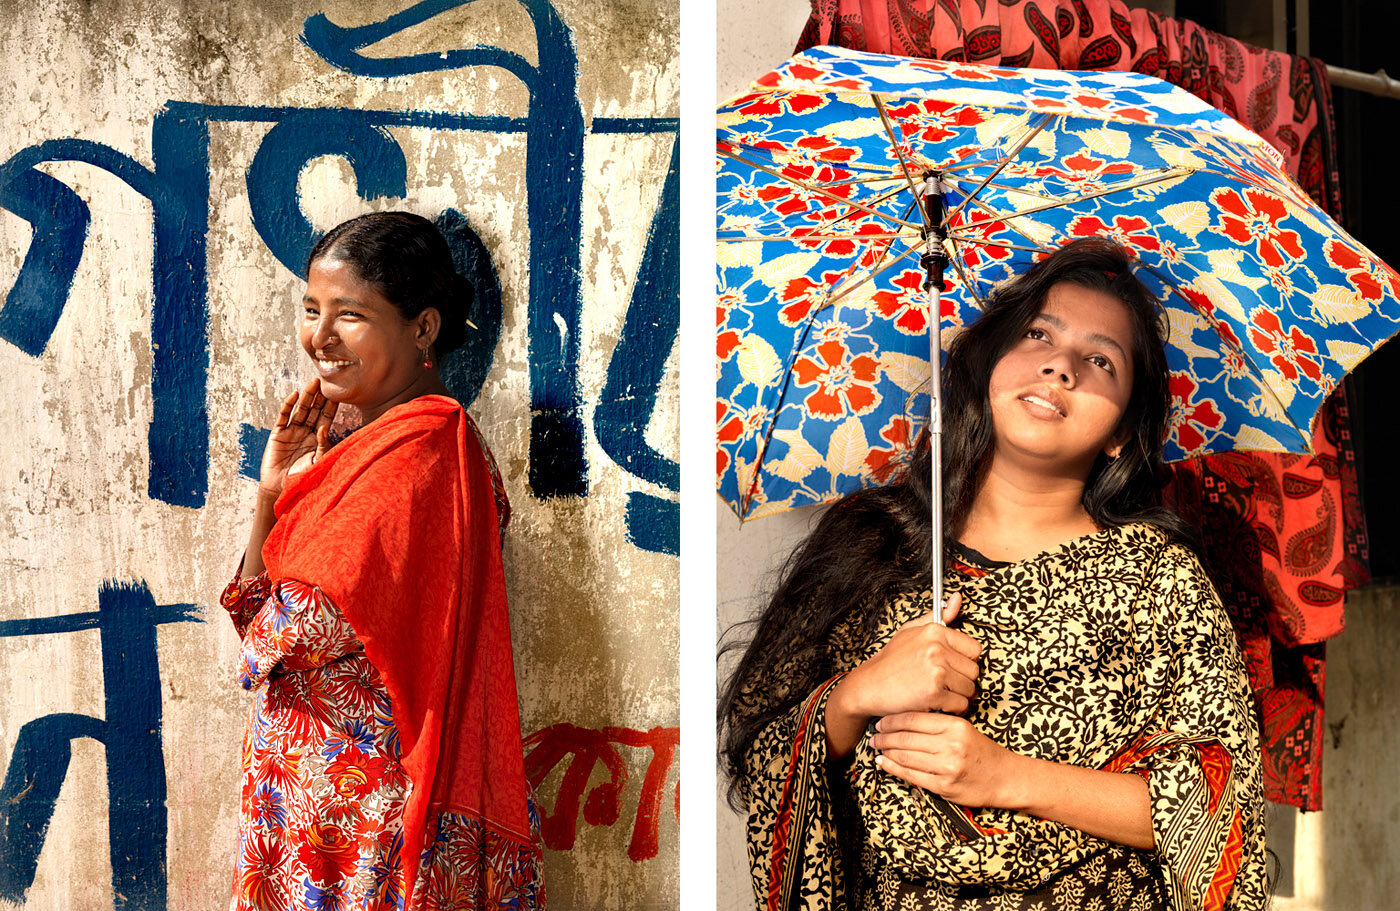   Portraits  of garment workers for Clean Cloth Campaign |  Bangladesh and Cambodia  